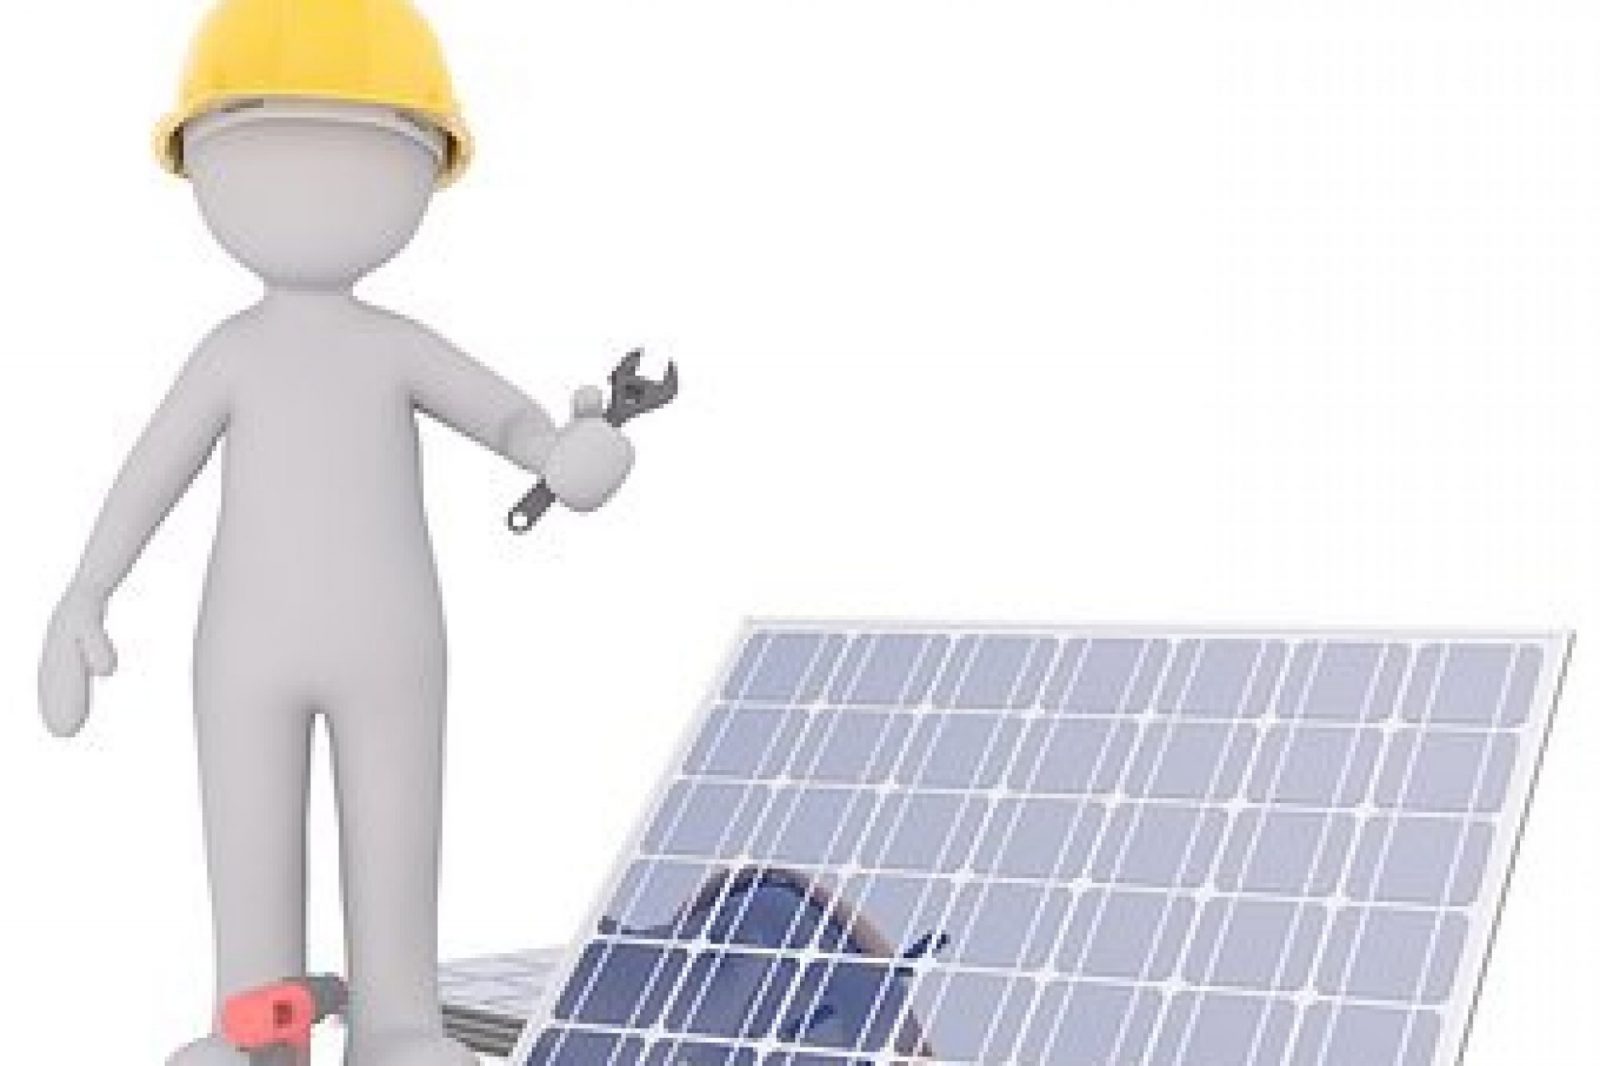 WHAT IS INVOLVED IN A SOLAR INSTALLATION